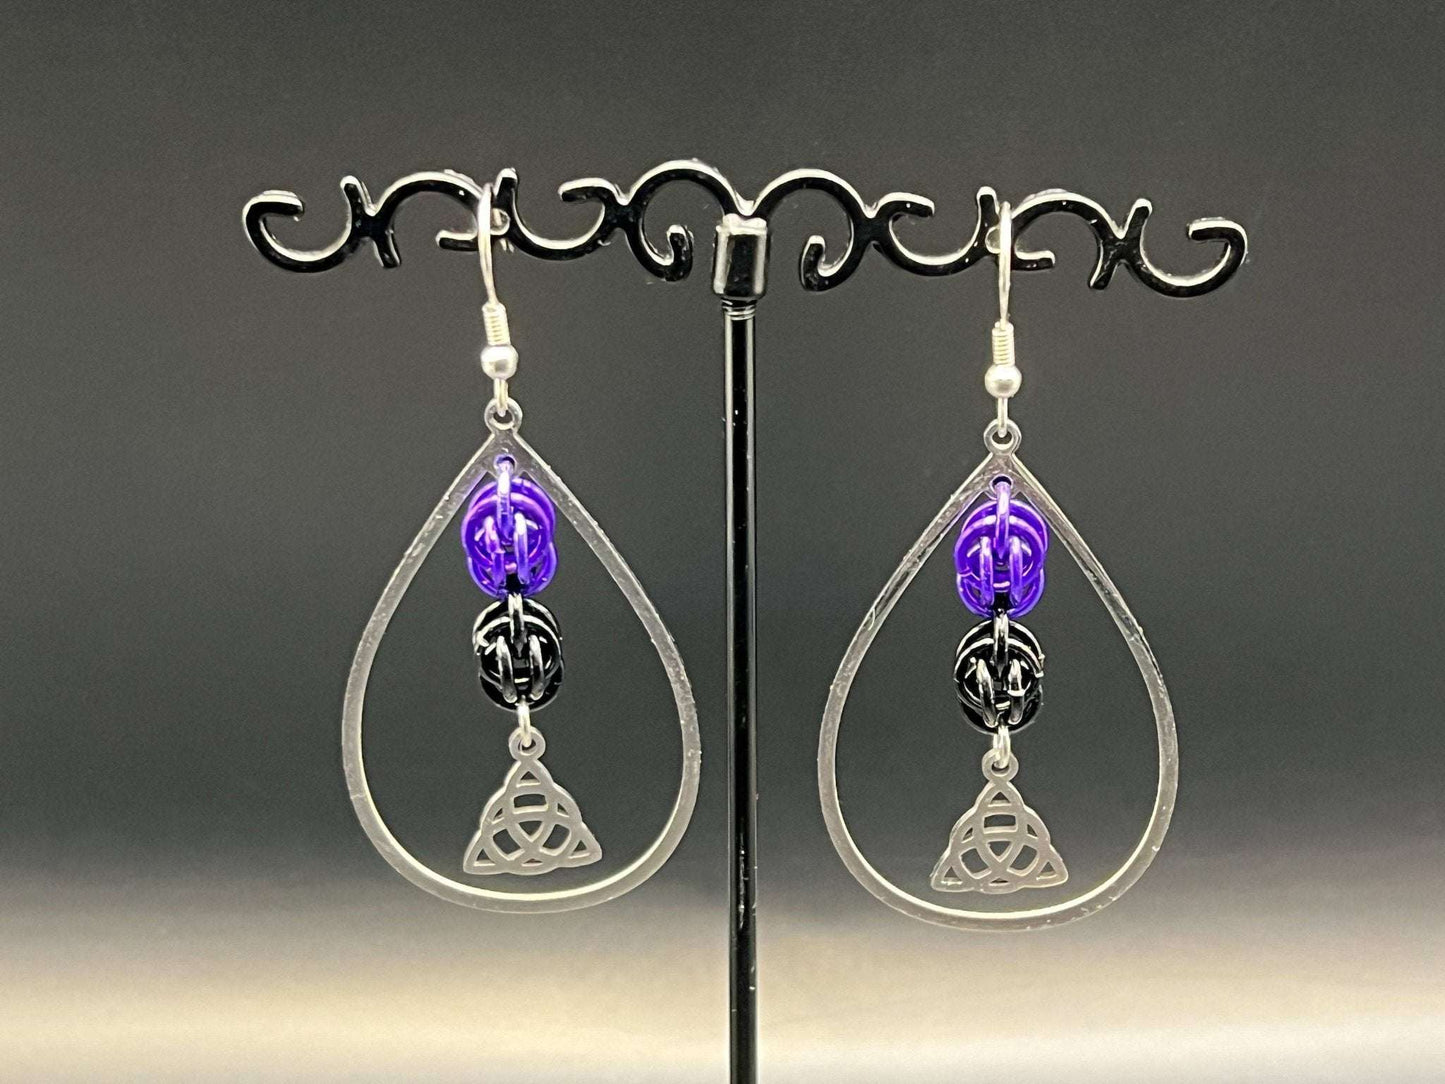 Charmed Teardrop: Earrings with Triquetra Charm - Megan Gros Designs